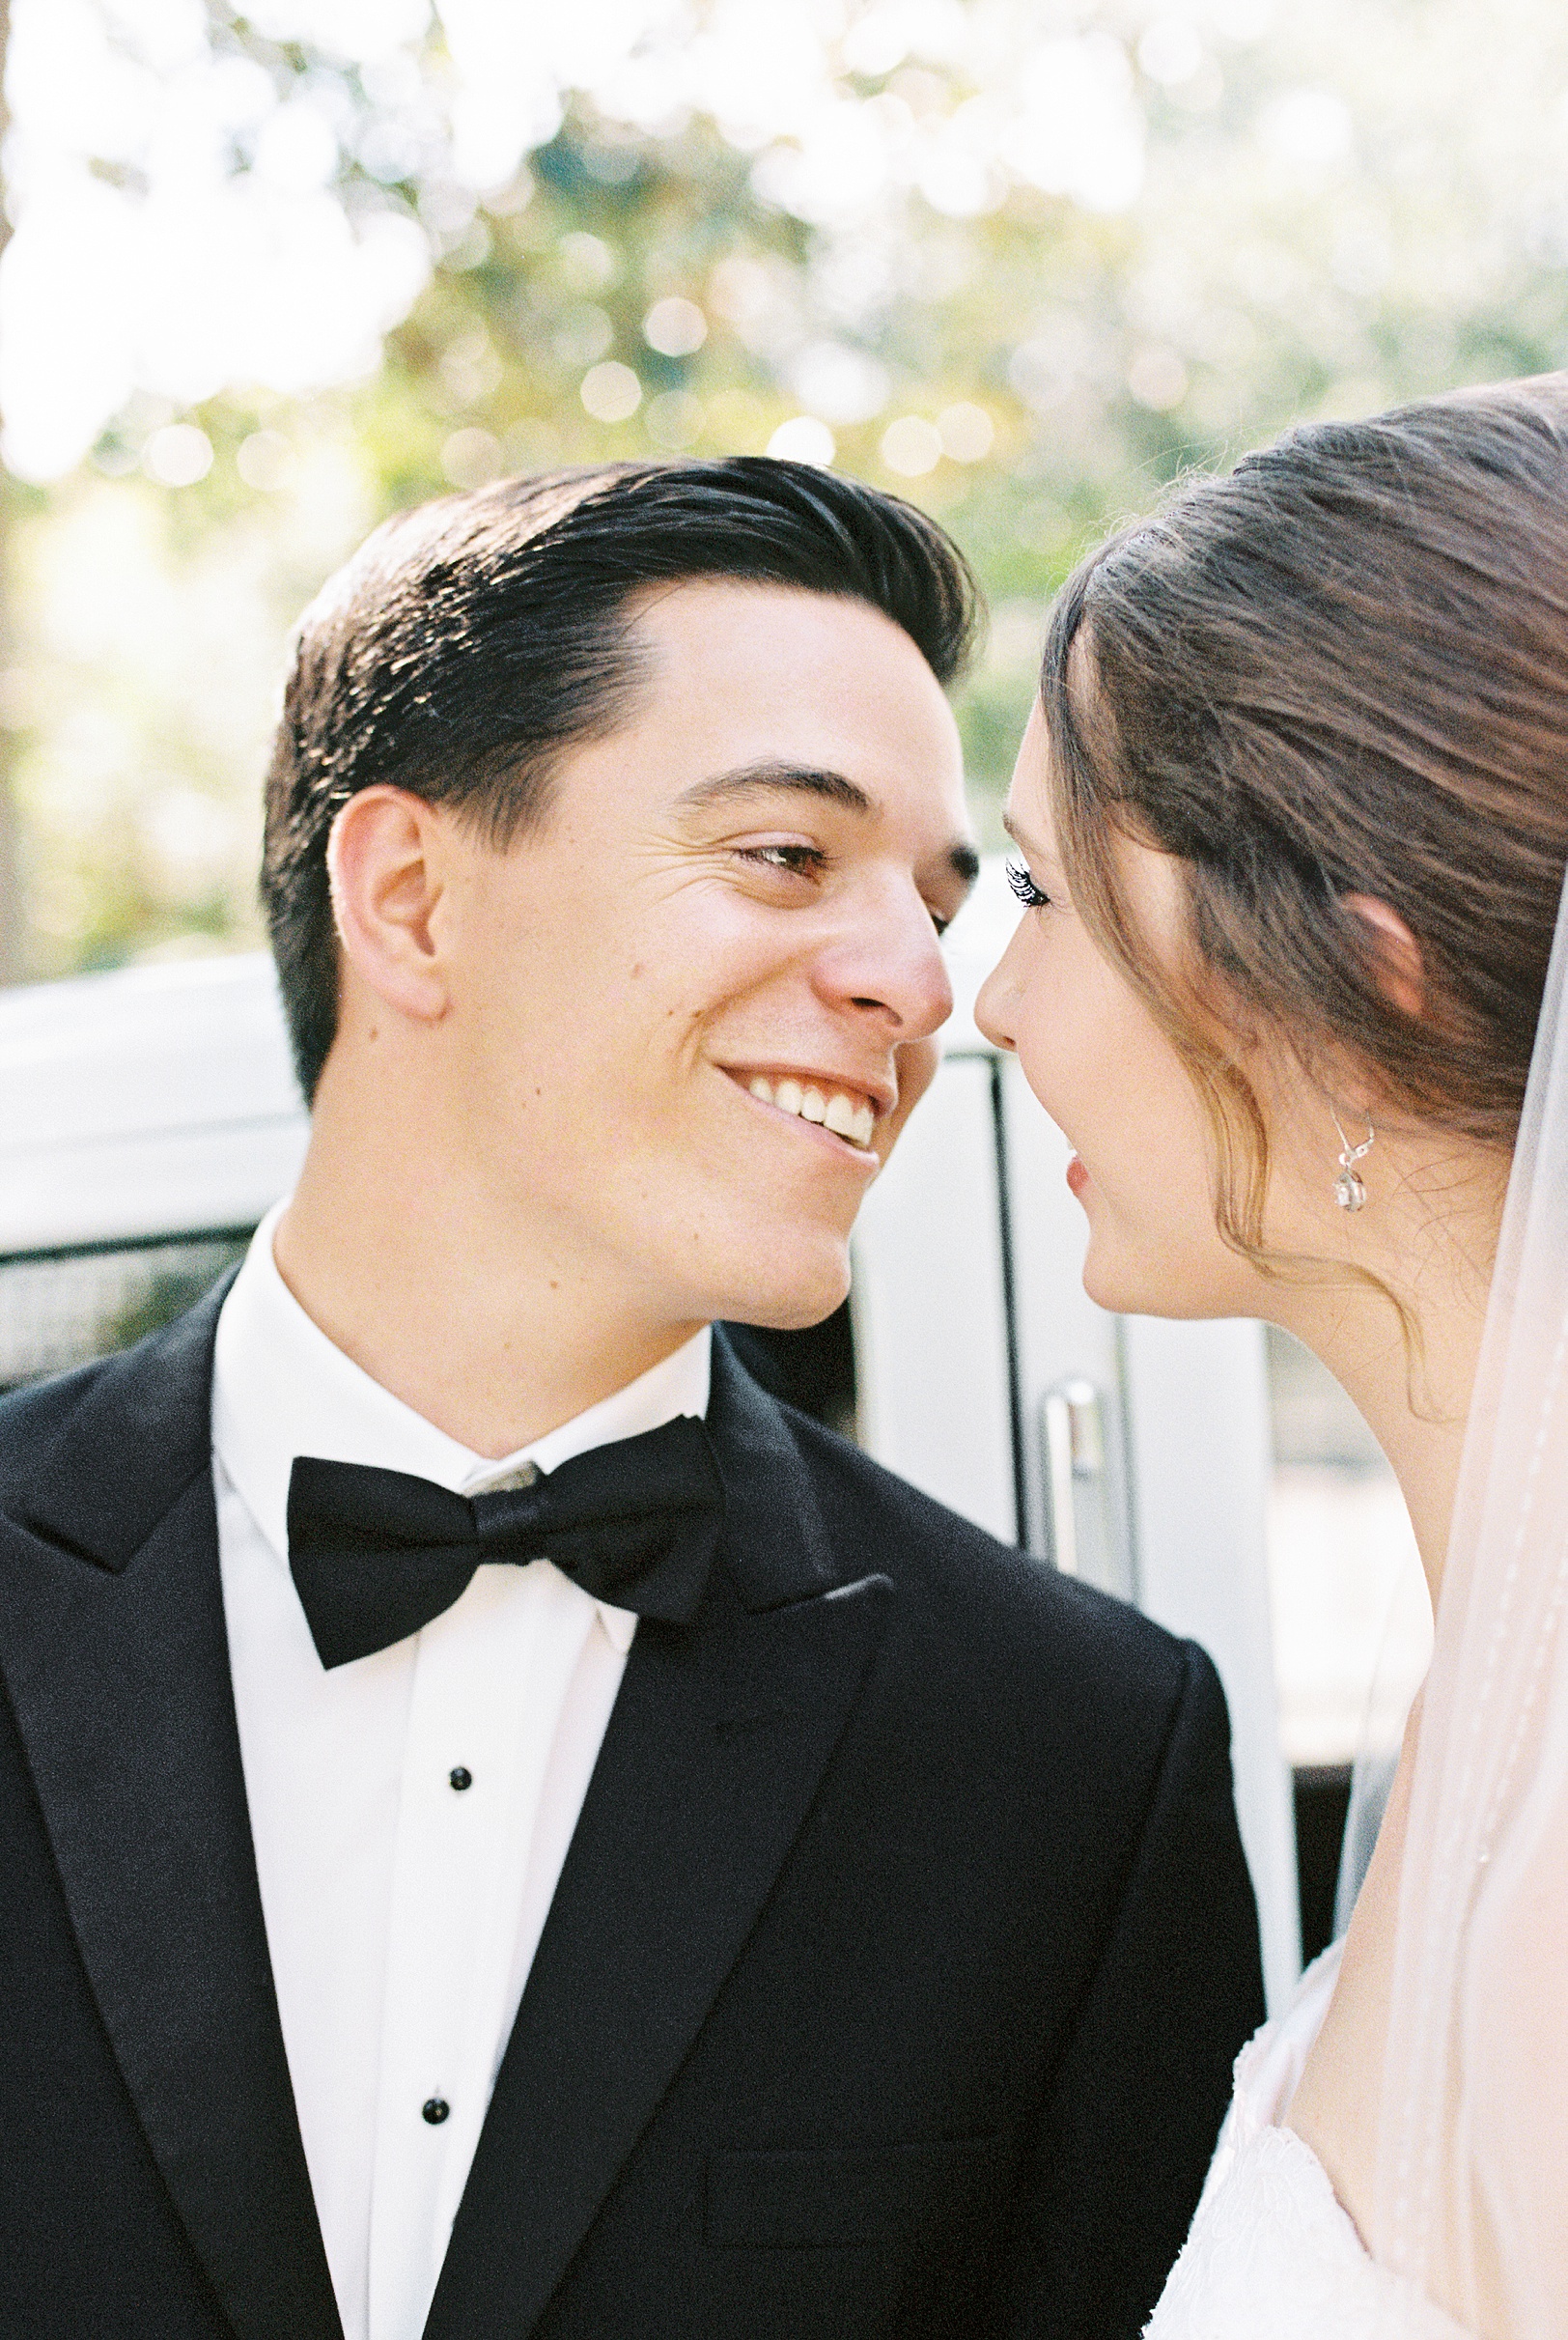 Film Portrait of Groom Smiling at Bride on Wedding Day | Kaitlin Scott Photography